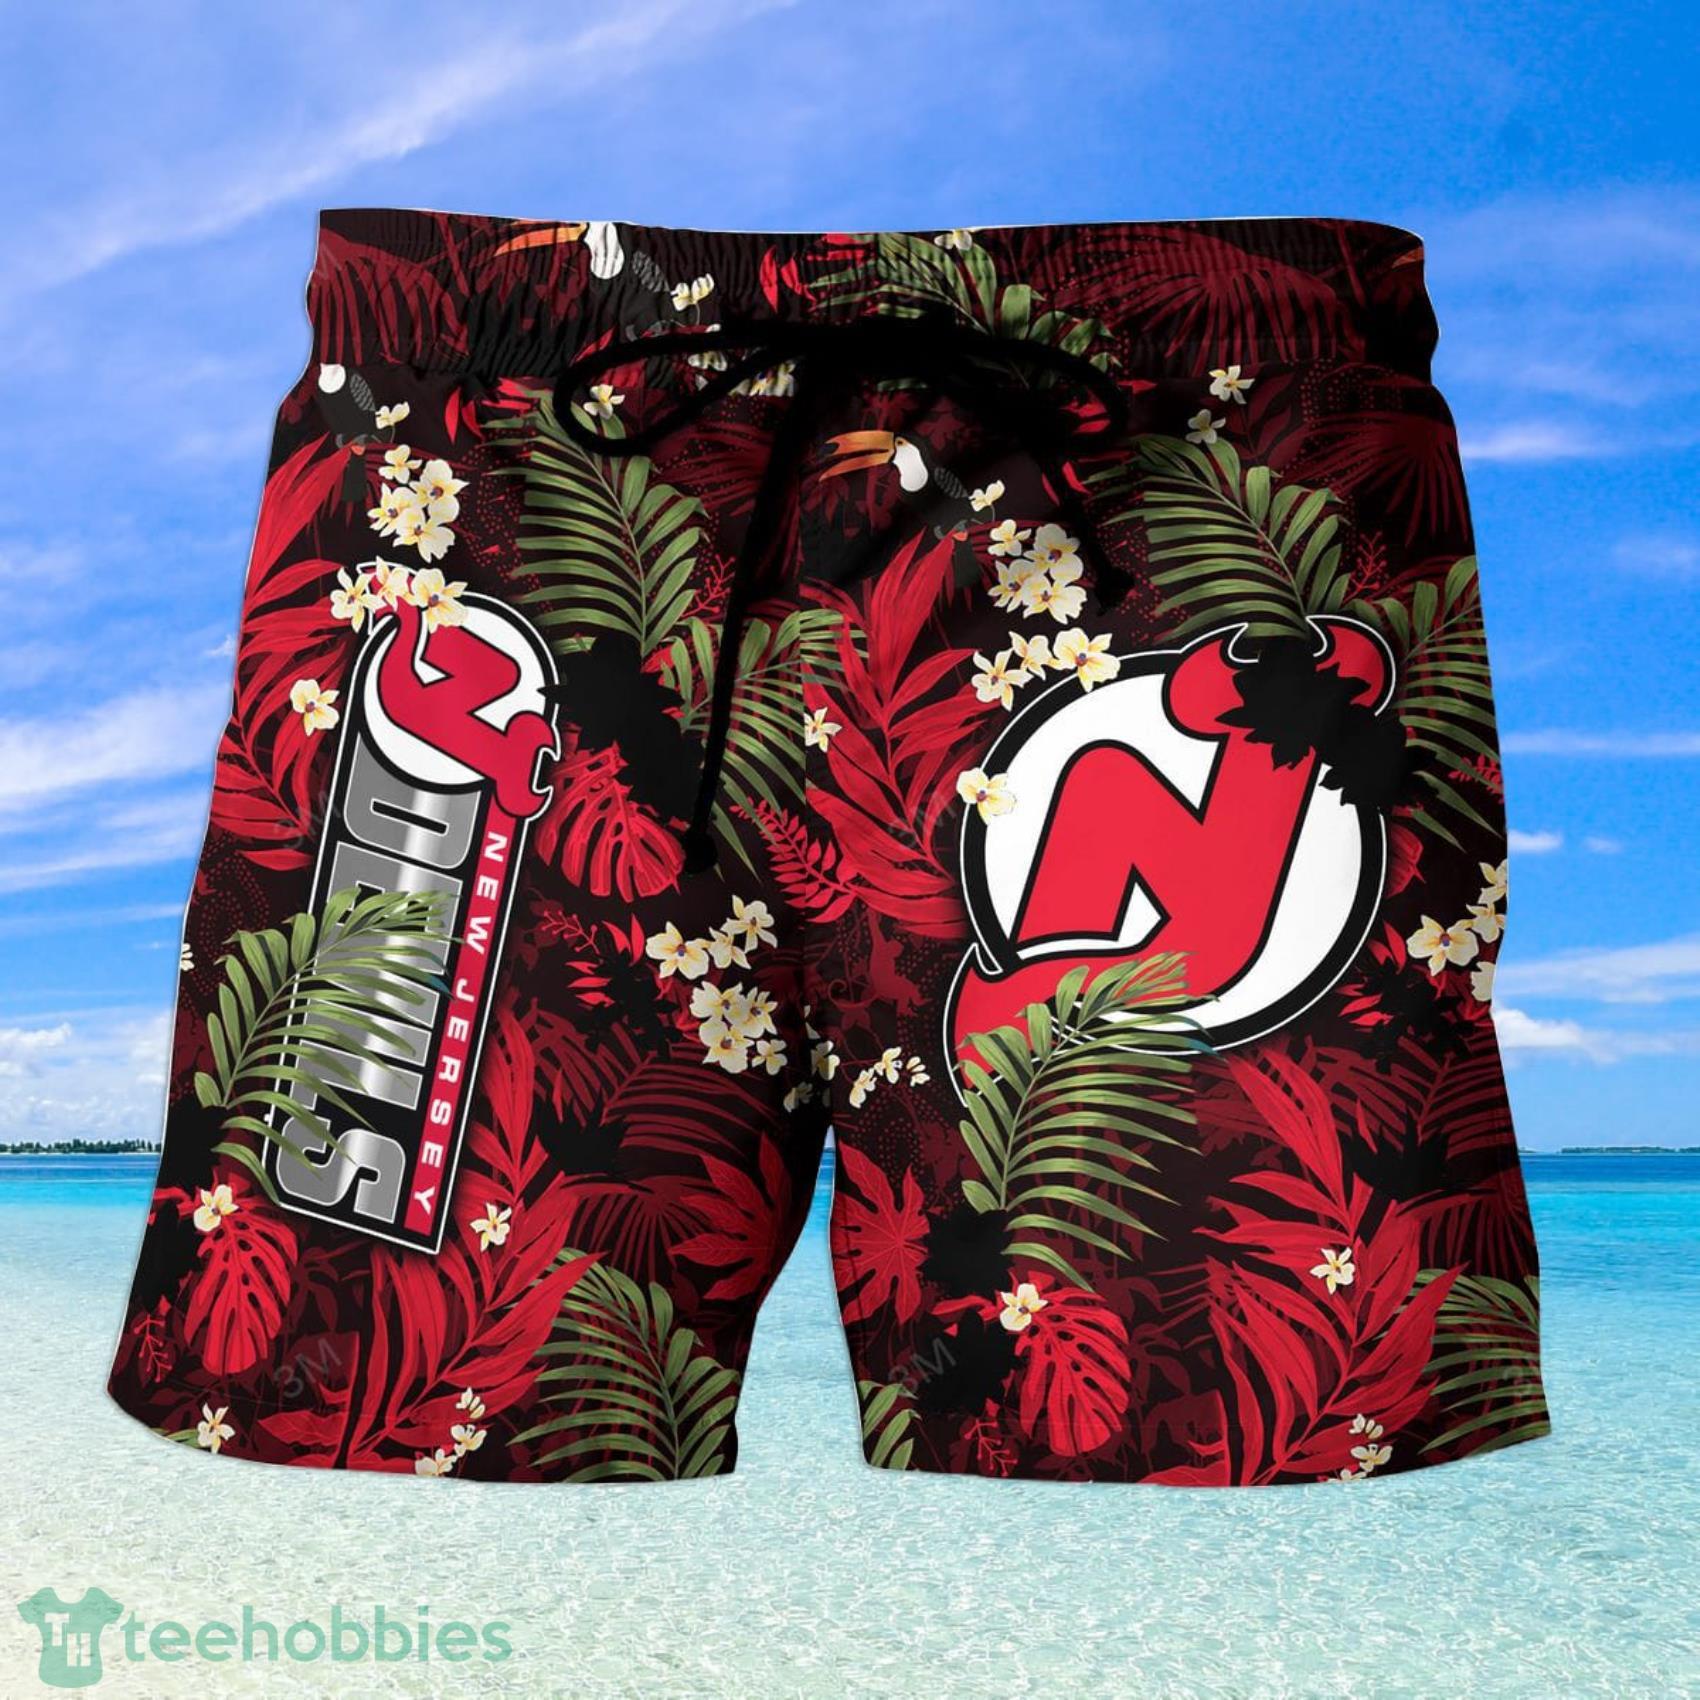 The best selling] New Jersey Devils NHL Floral Full Printing 3D Hawaiian  Shirt